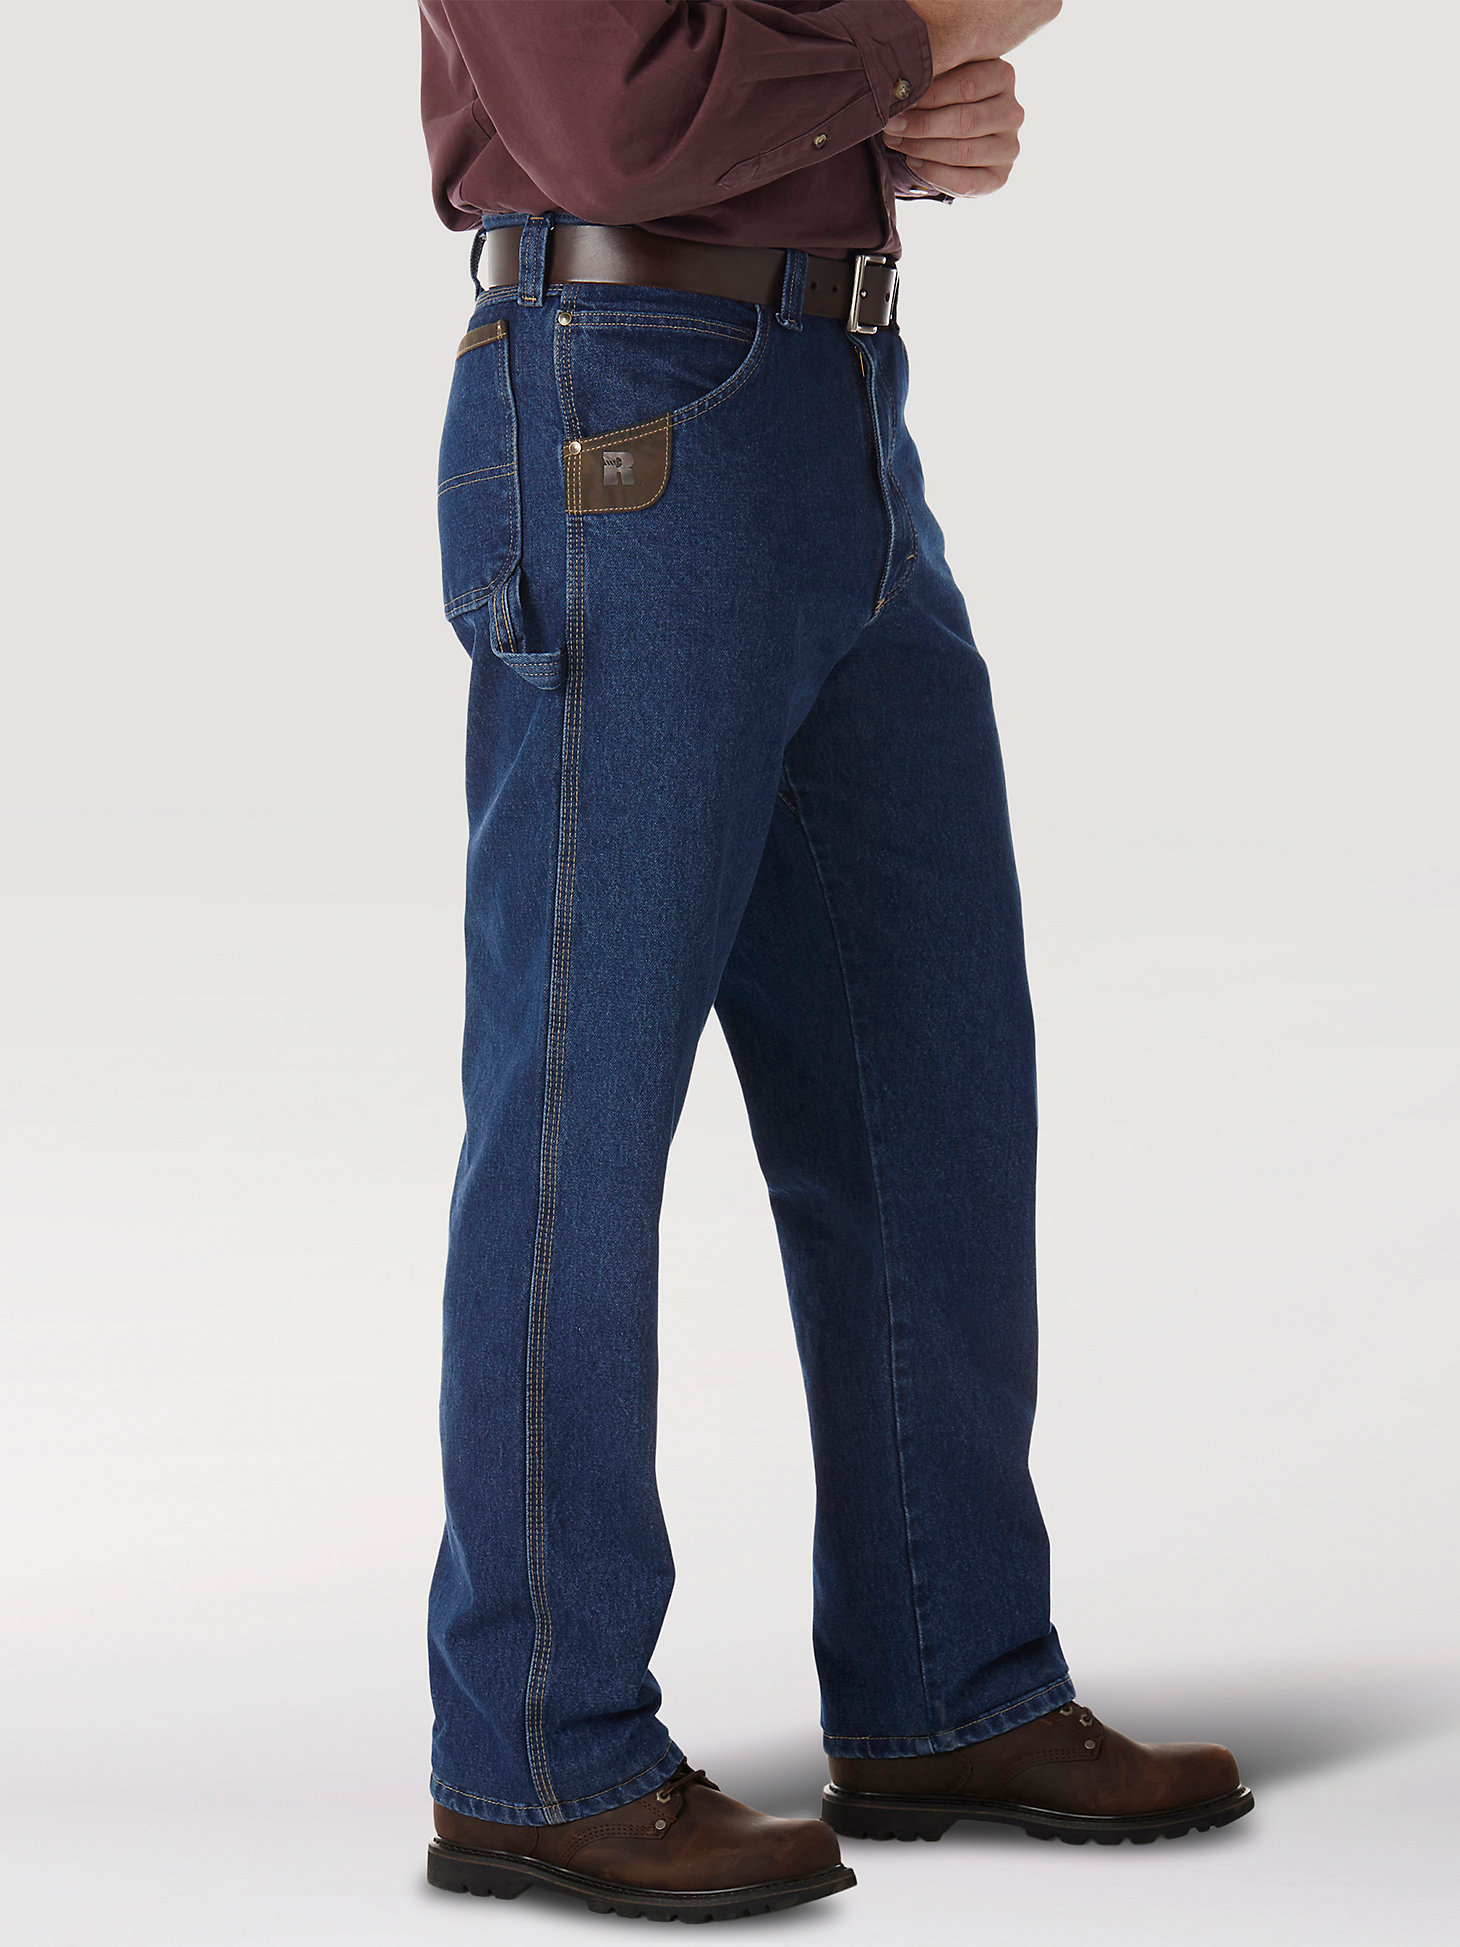 Wrangler® RIGGS Workwear® Work Horse Jean - Relaxed Fit in Antique Indigo alternative view 5